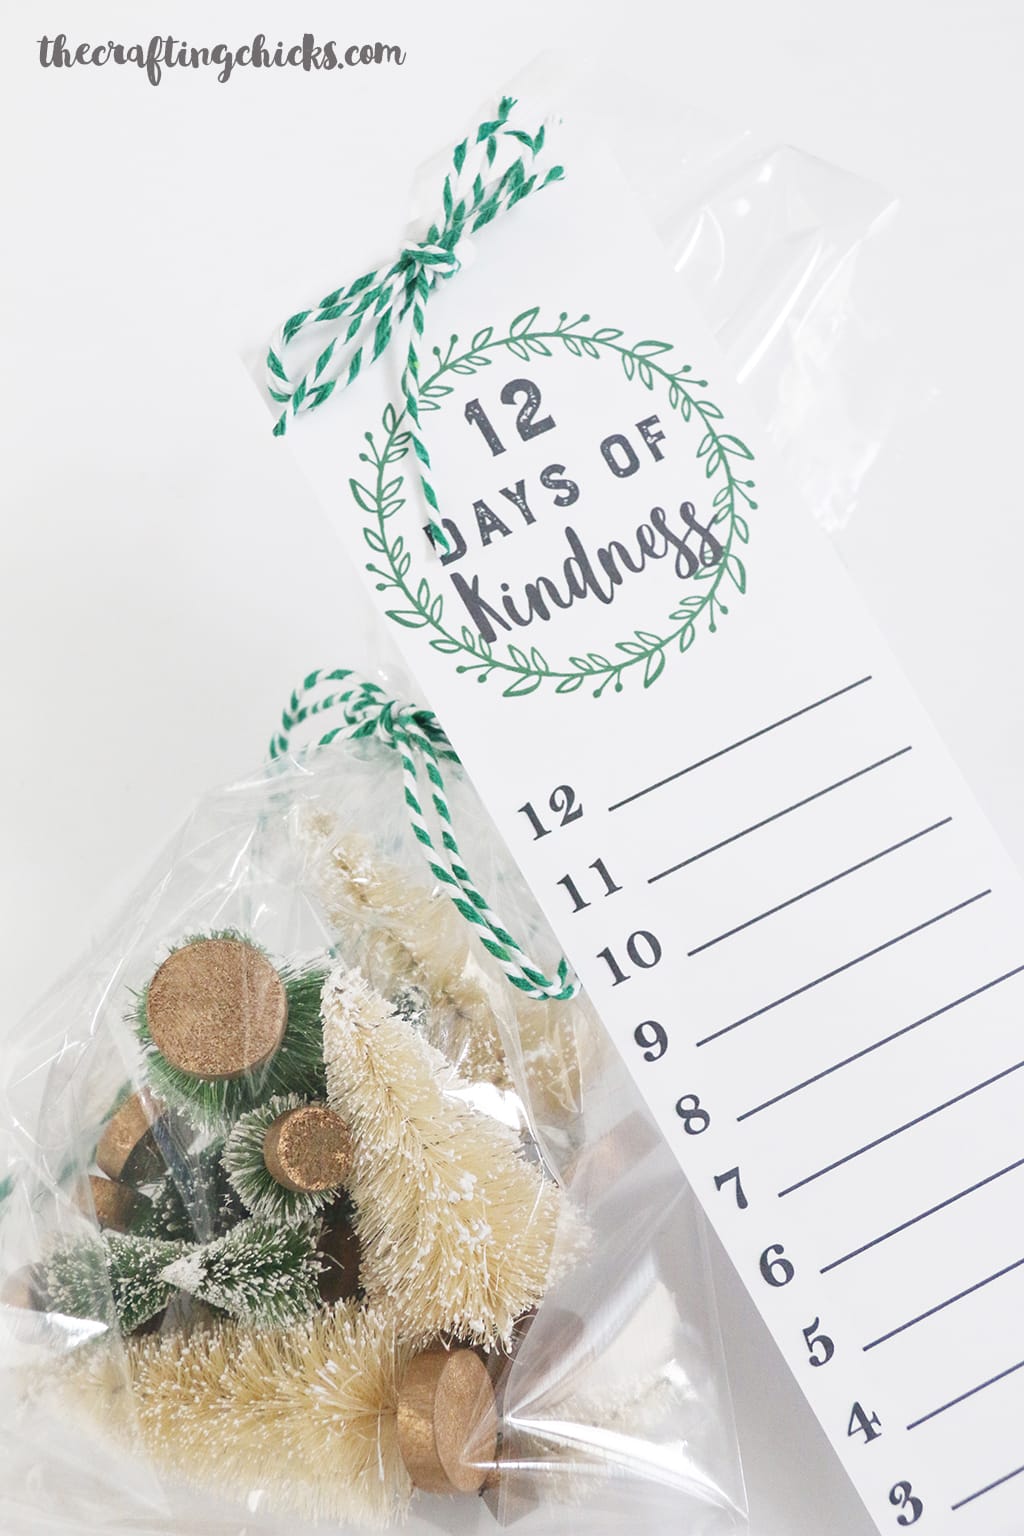 12 Days of Kindness Printable - A Christmas Countdown - A fun way to add family service to your Christmas celebration!